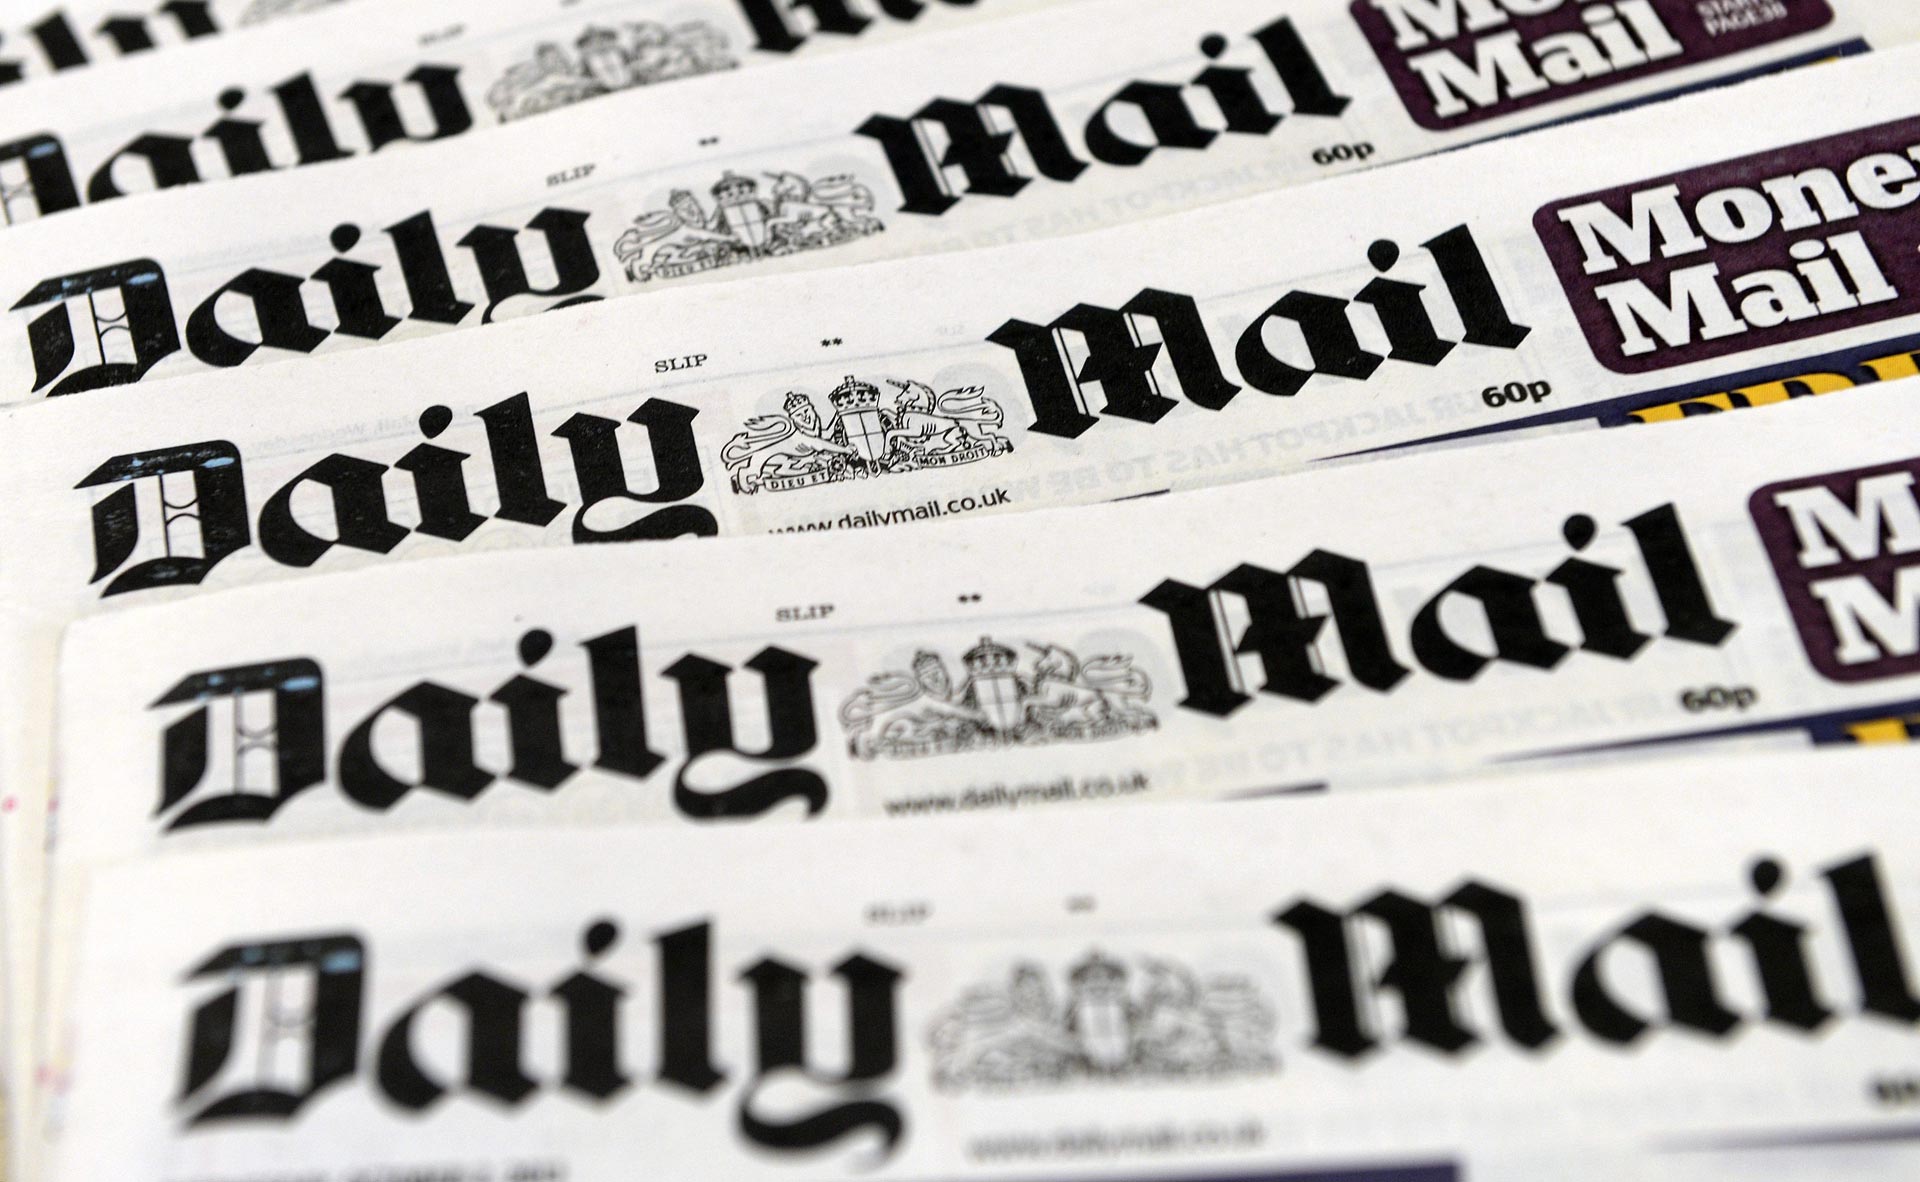 Should the ‘Daily Mail’ be worried